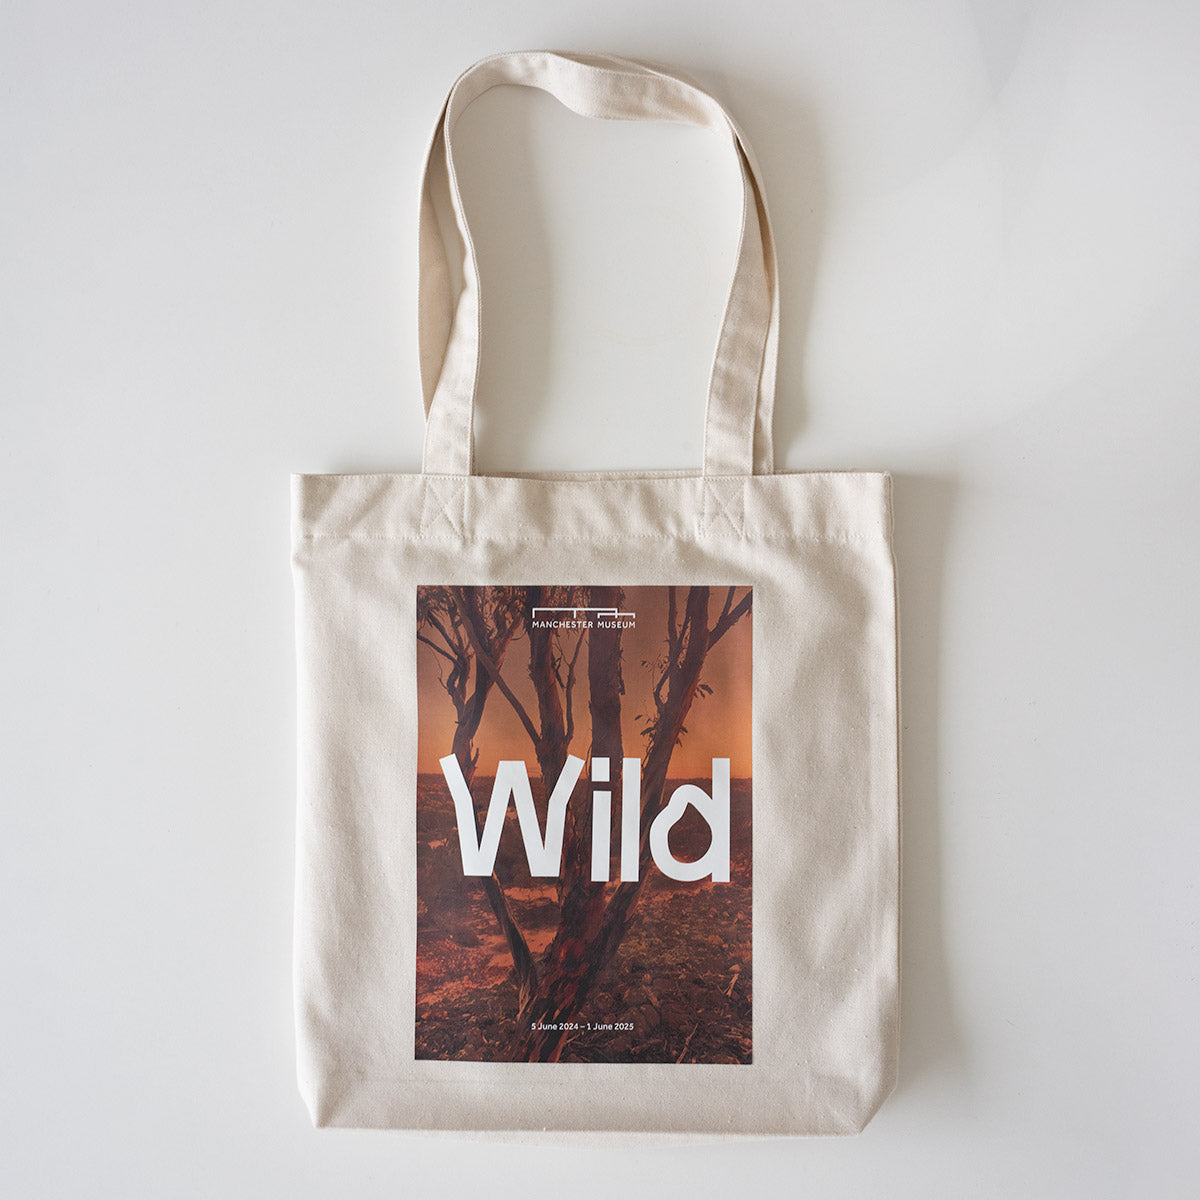 Cream tote bag with the Wild exhibition image and logo placed a the centre.